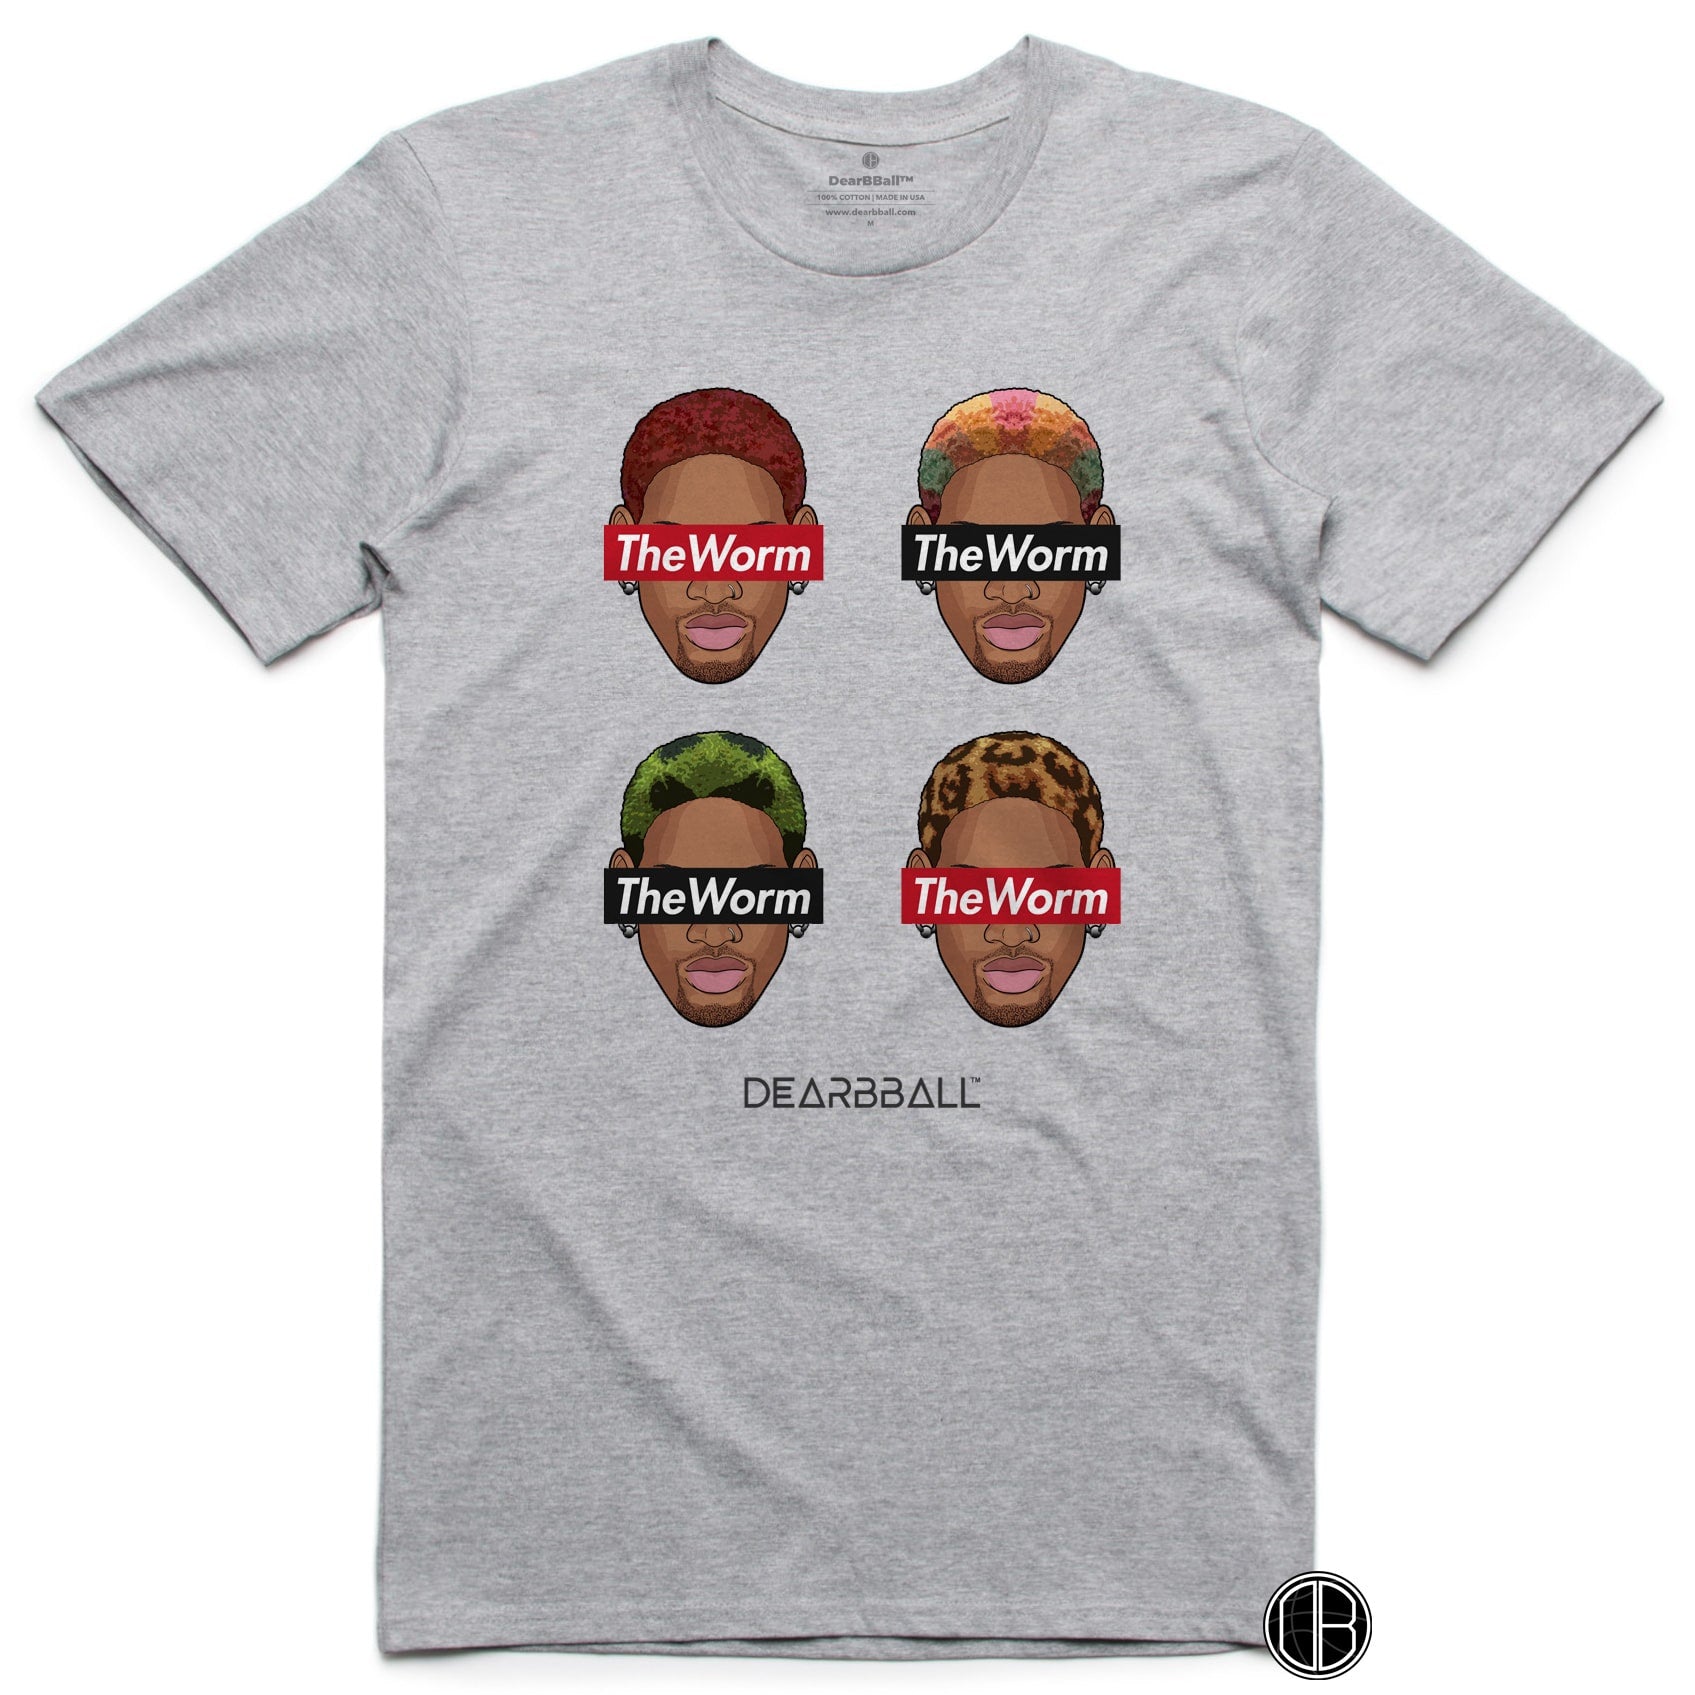 DearBBall T-Shirt - The WORM 4 Hairs Style Edition